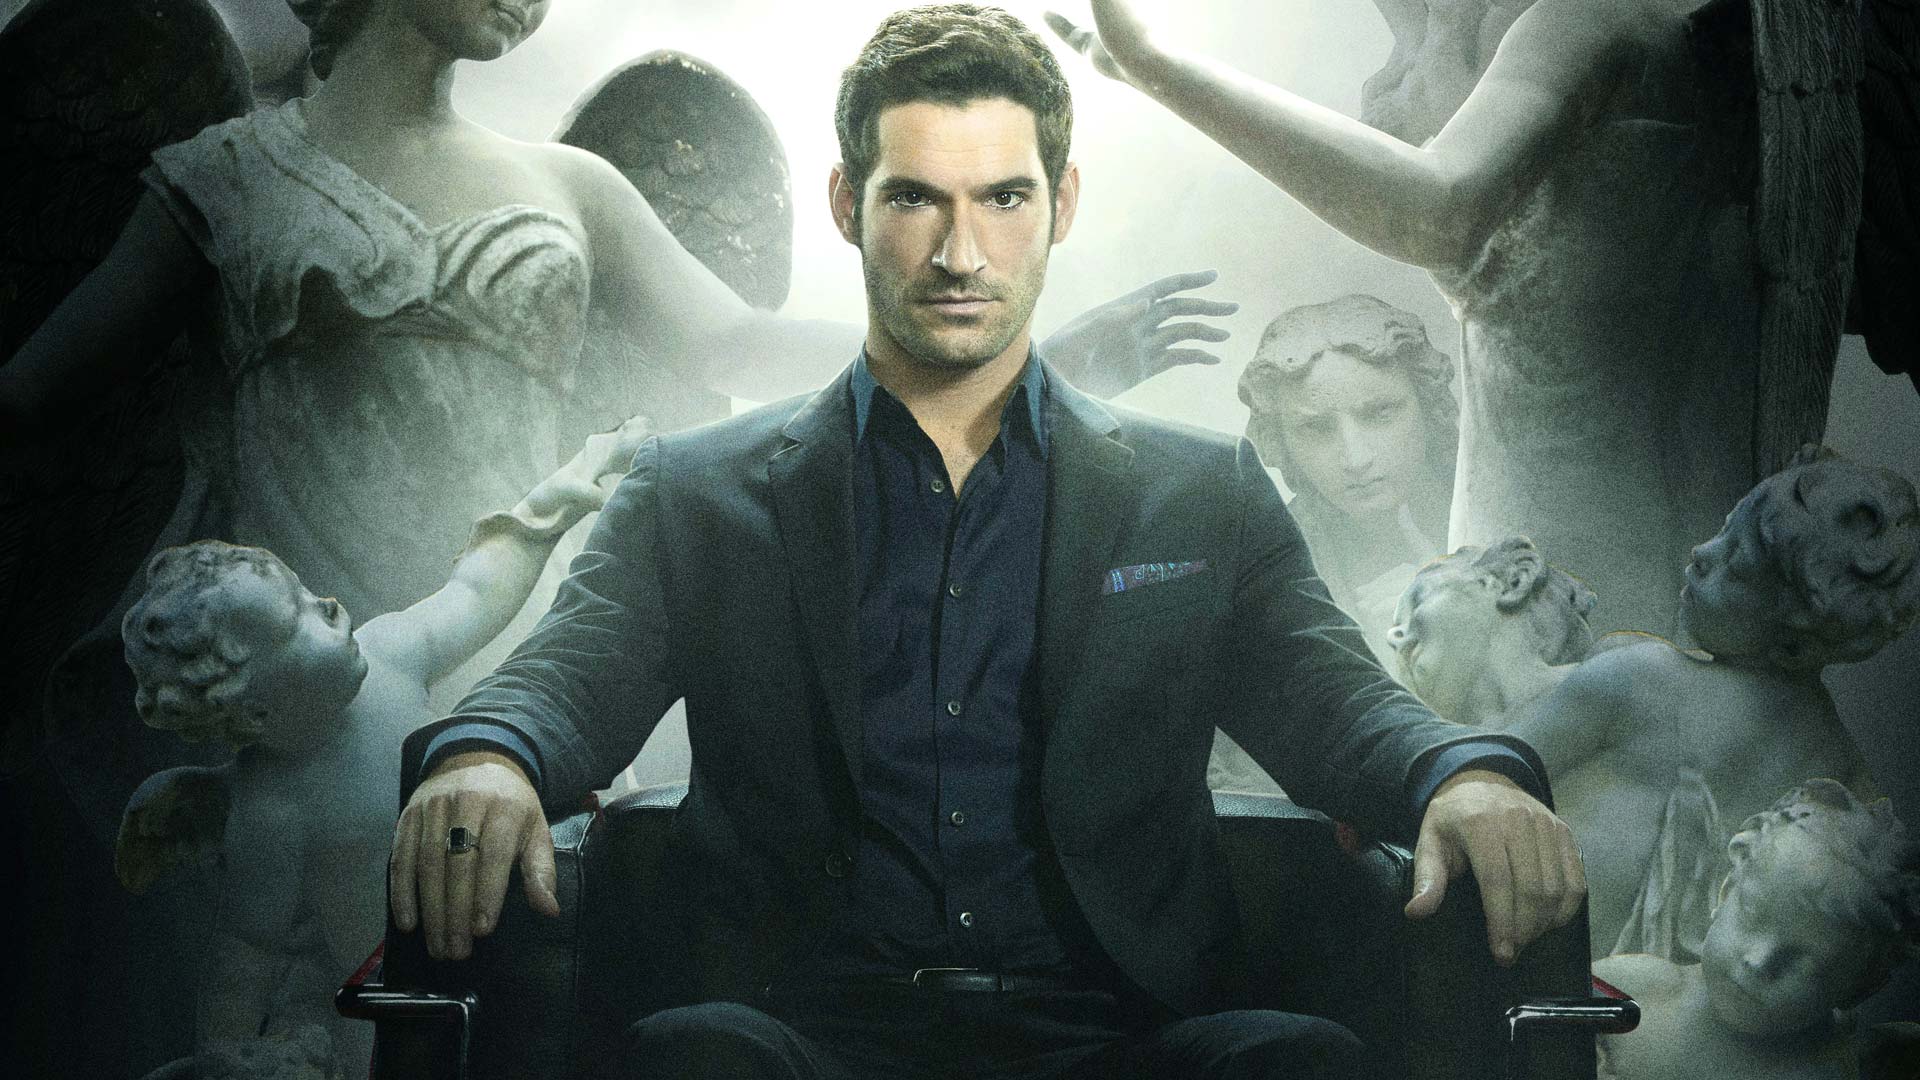 lucifer wallpaper,movie,human,action film,fictional character,games